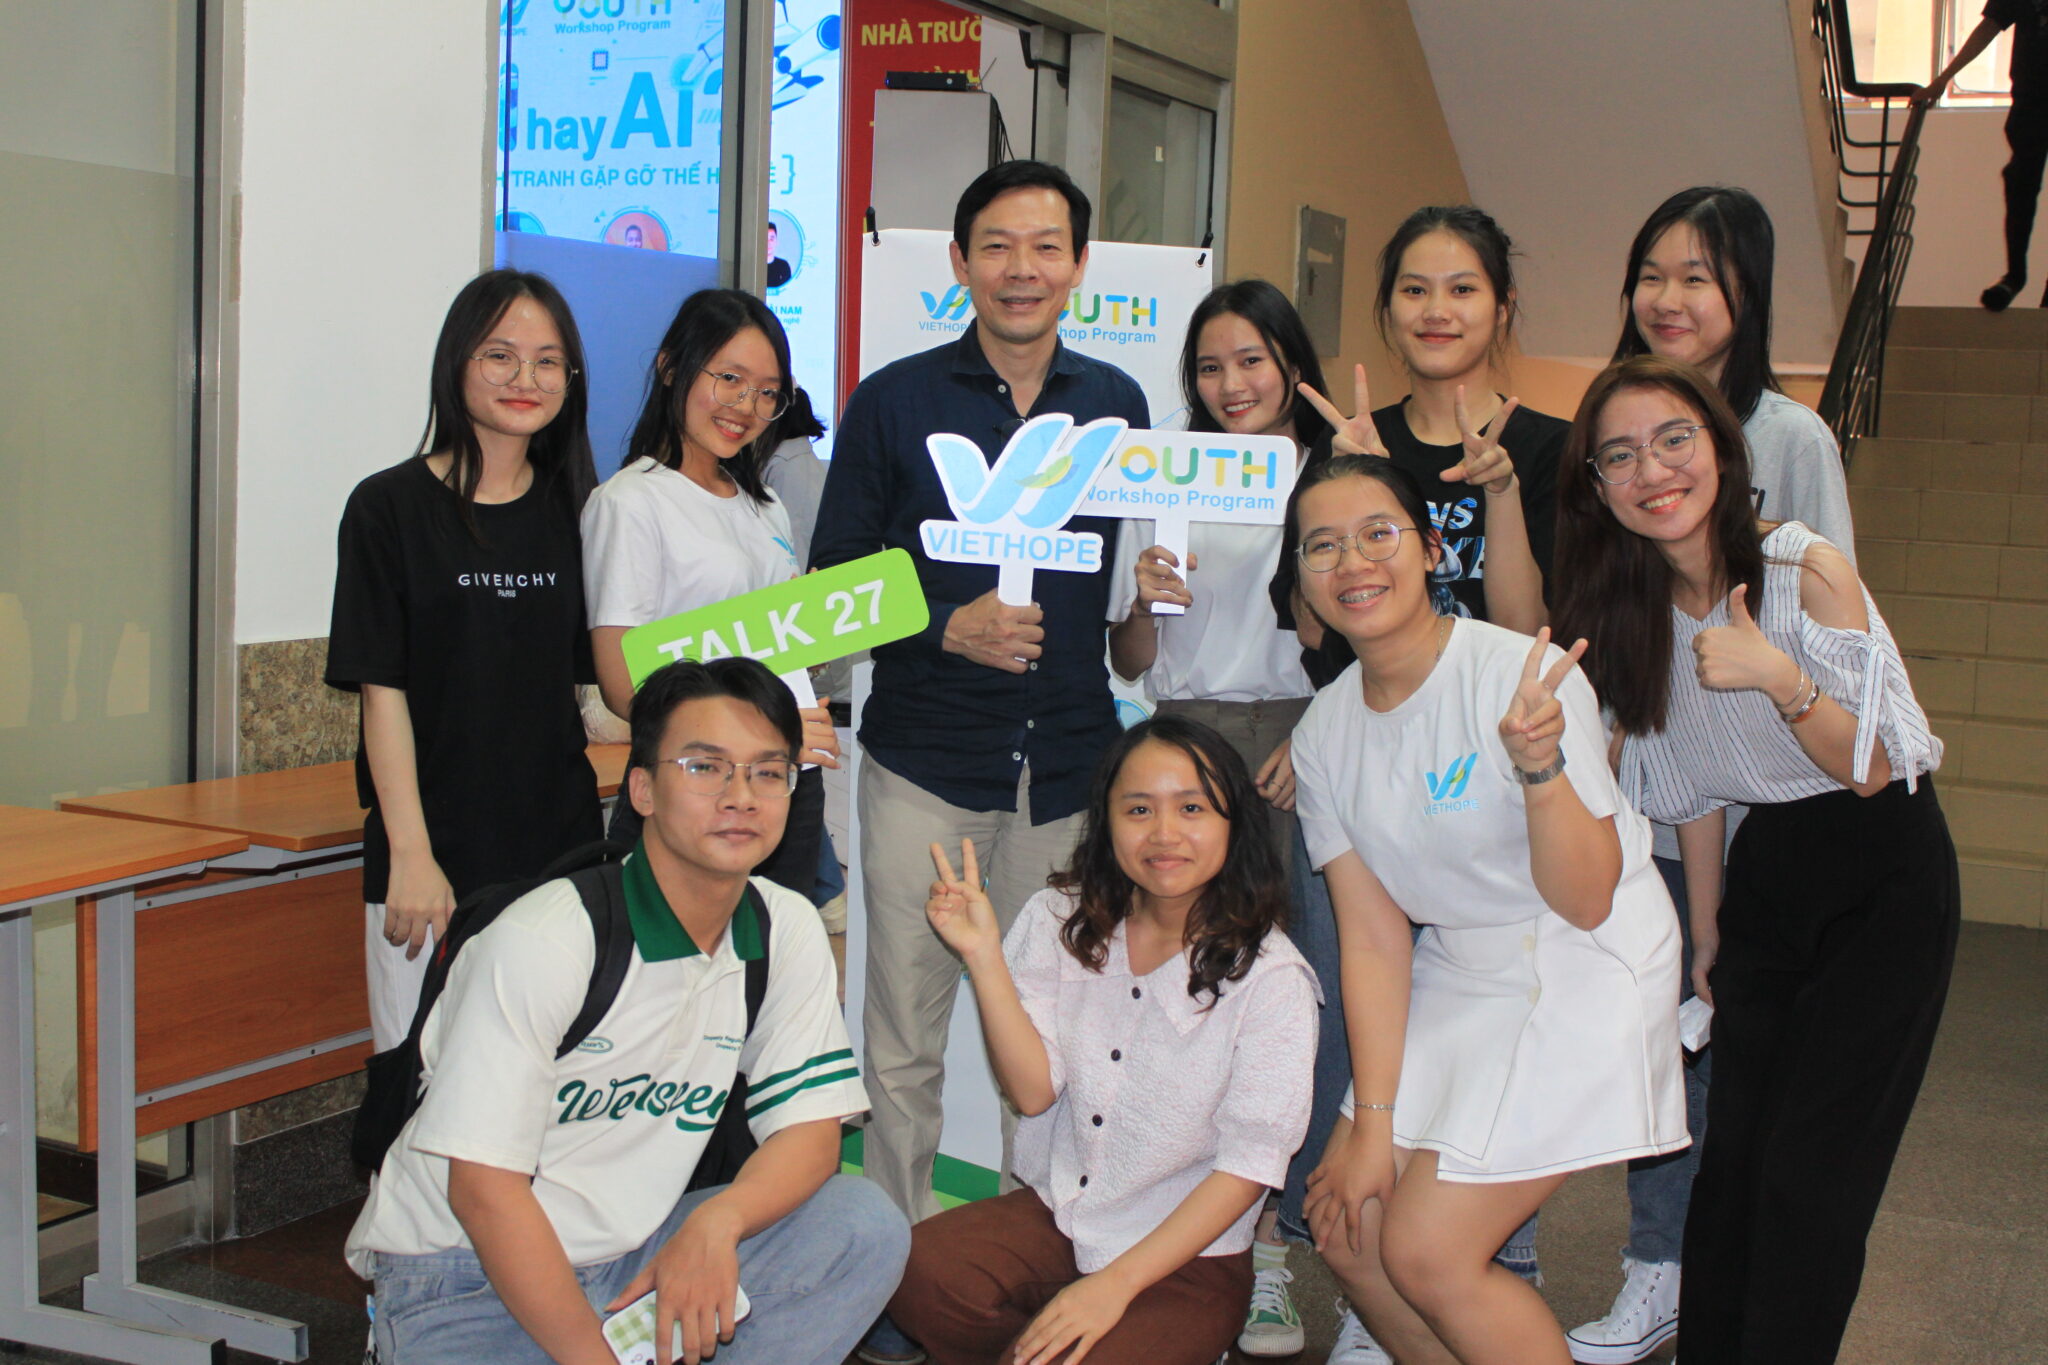 Students VietHope taking photo with Mr. Phong at Talk 27